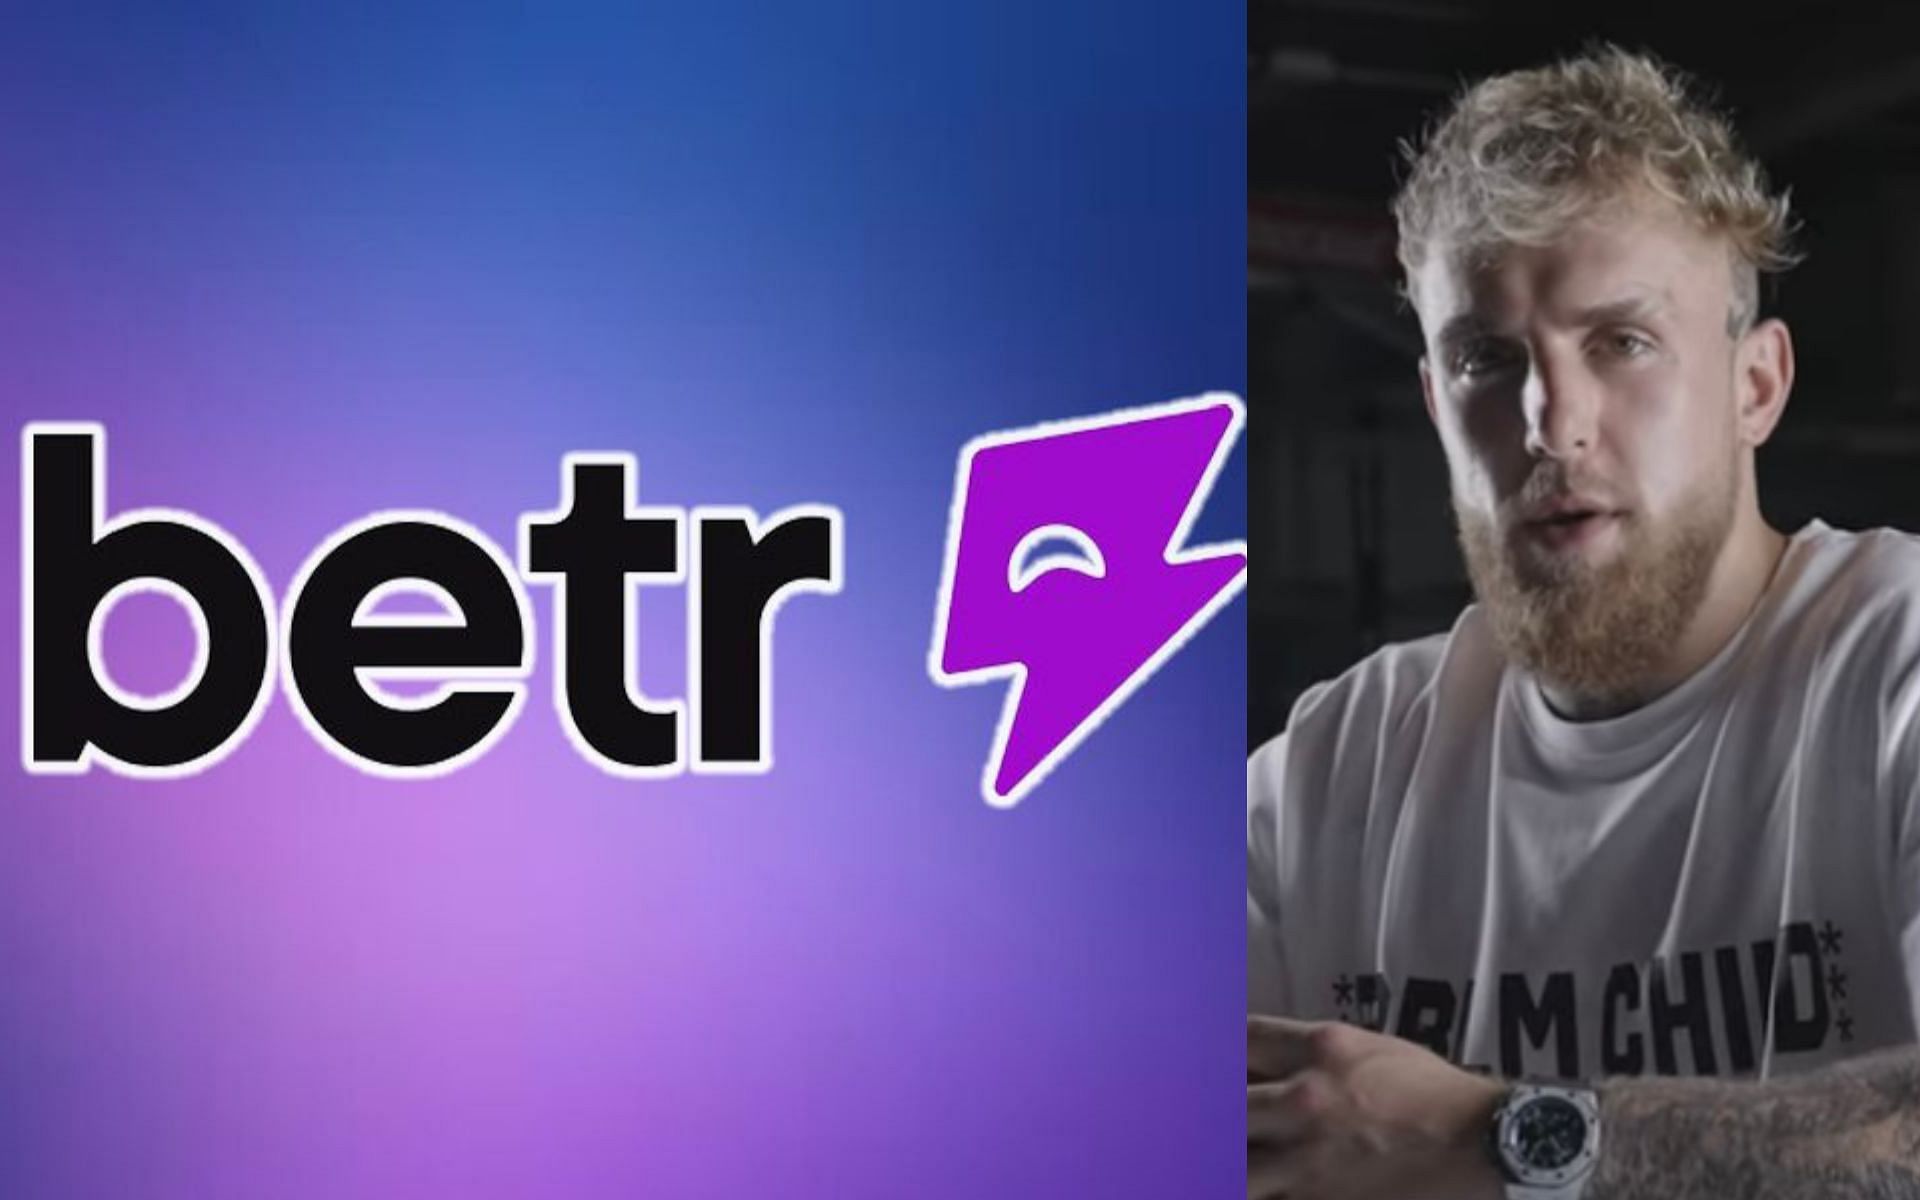 Betr logo (left) and Jake Paul (right) [ Image credits: Betr /Youtube )